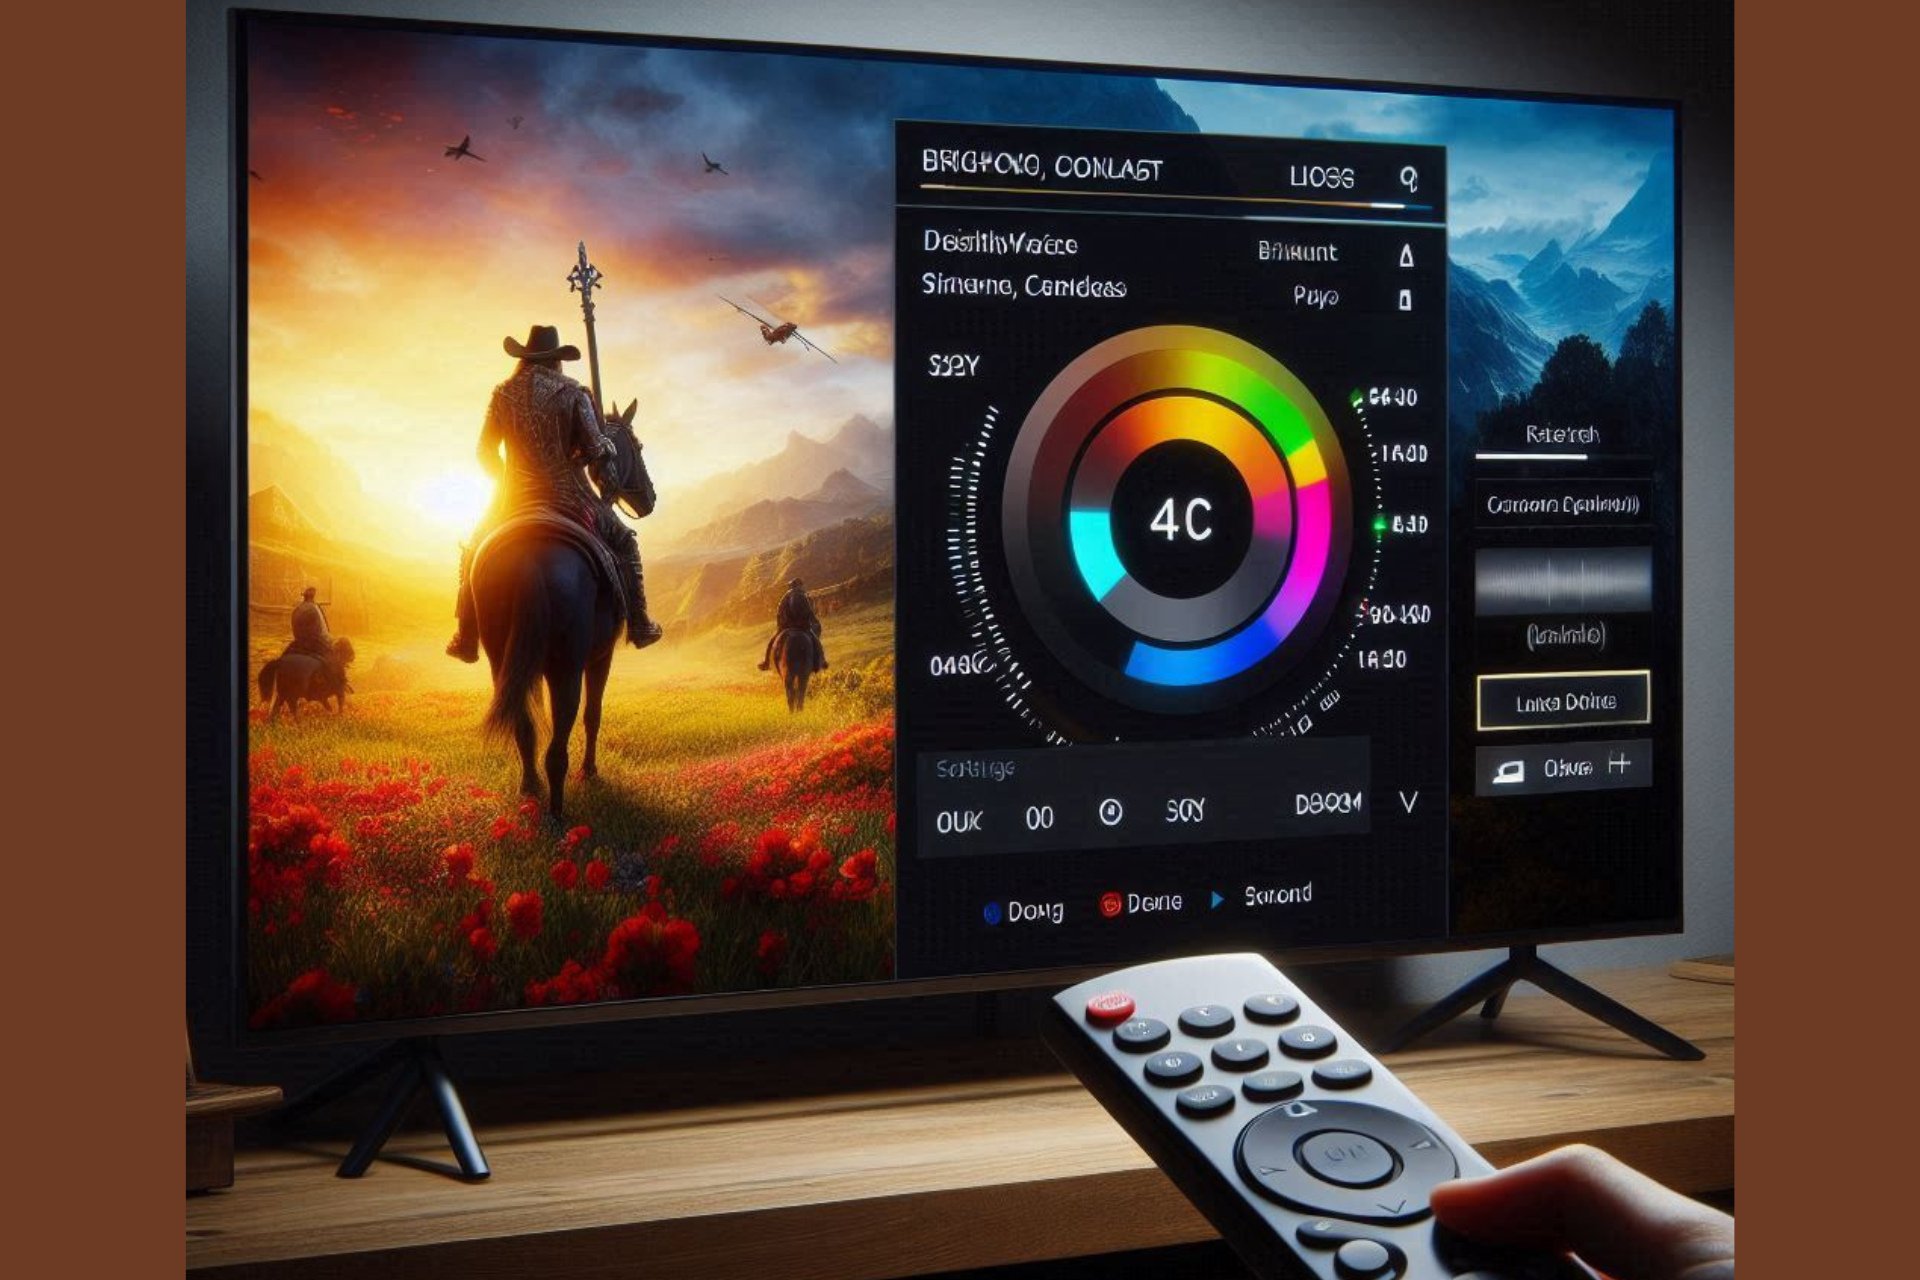 What are the best picture settings for 4k tv